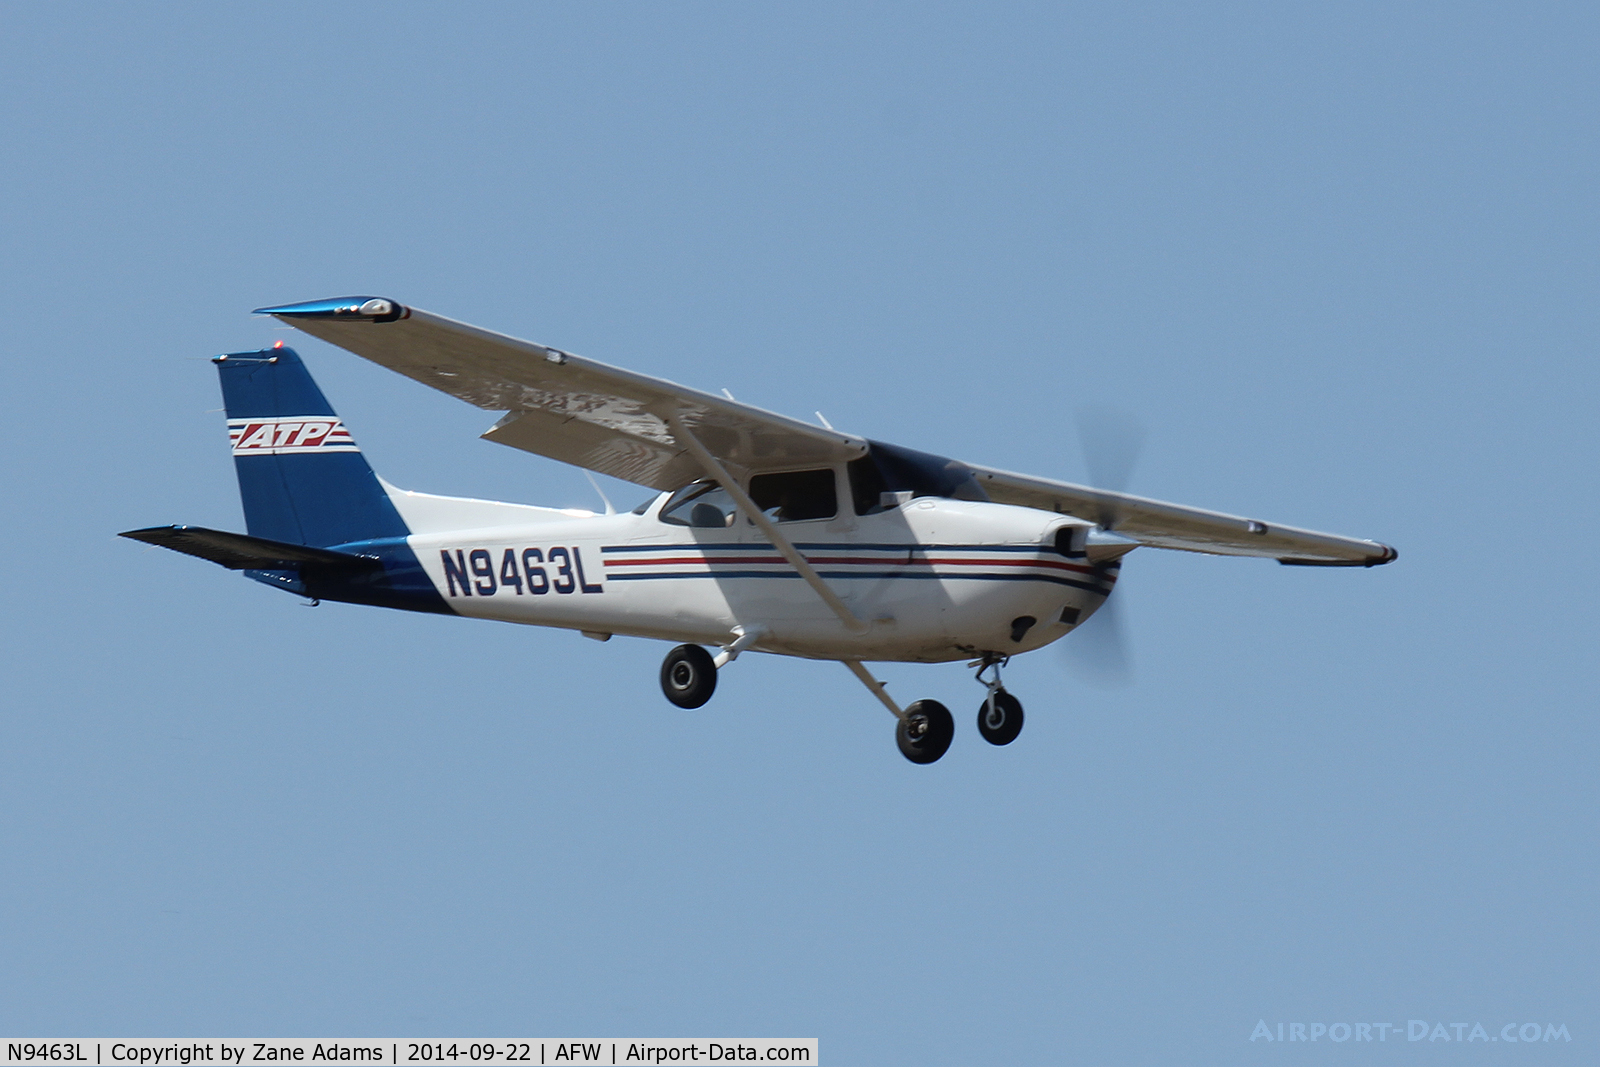 N9463L, 2012 Cessna 172S C/N 172s11212, At Alliance Airport - Fort Worth, TX